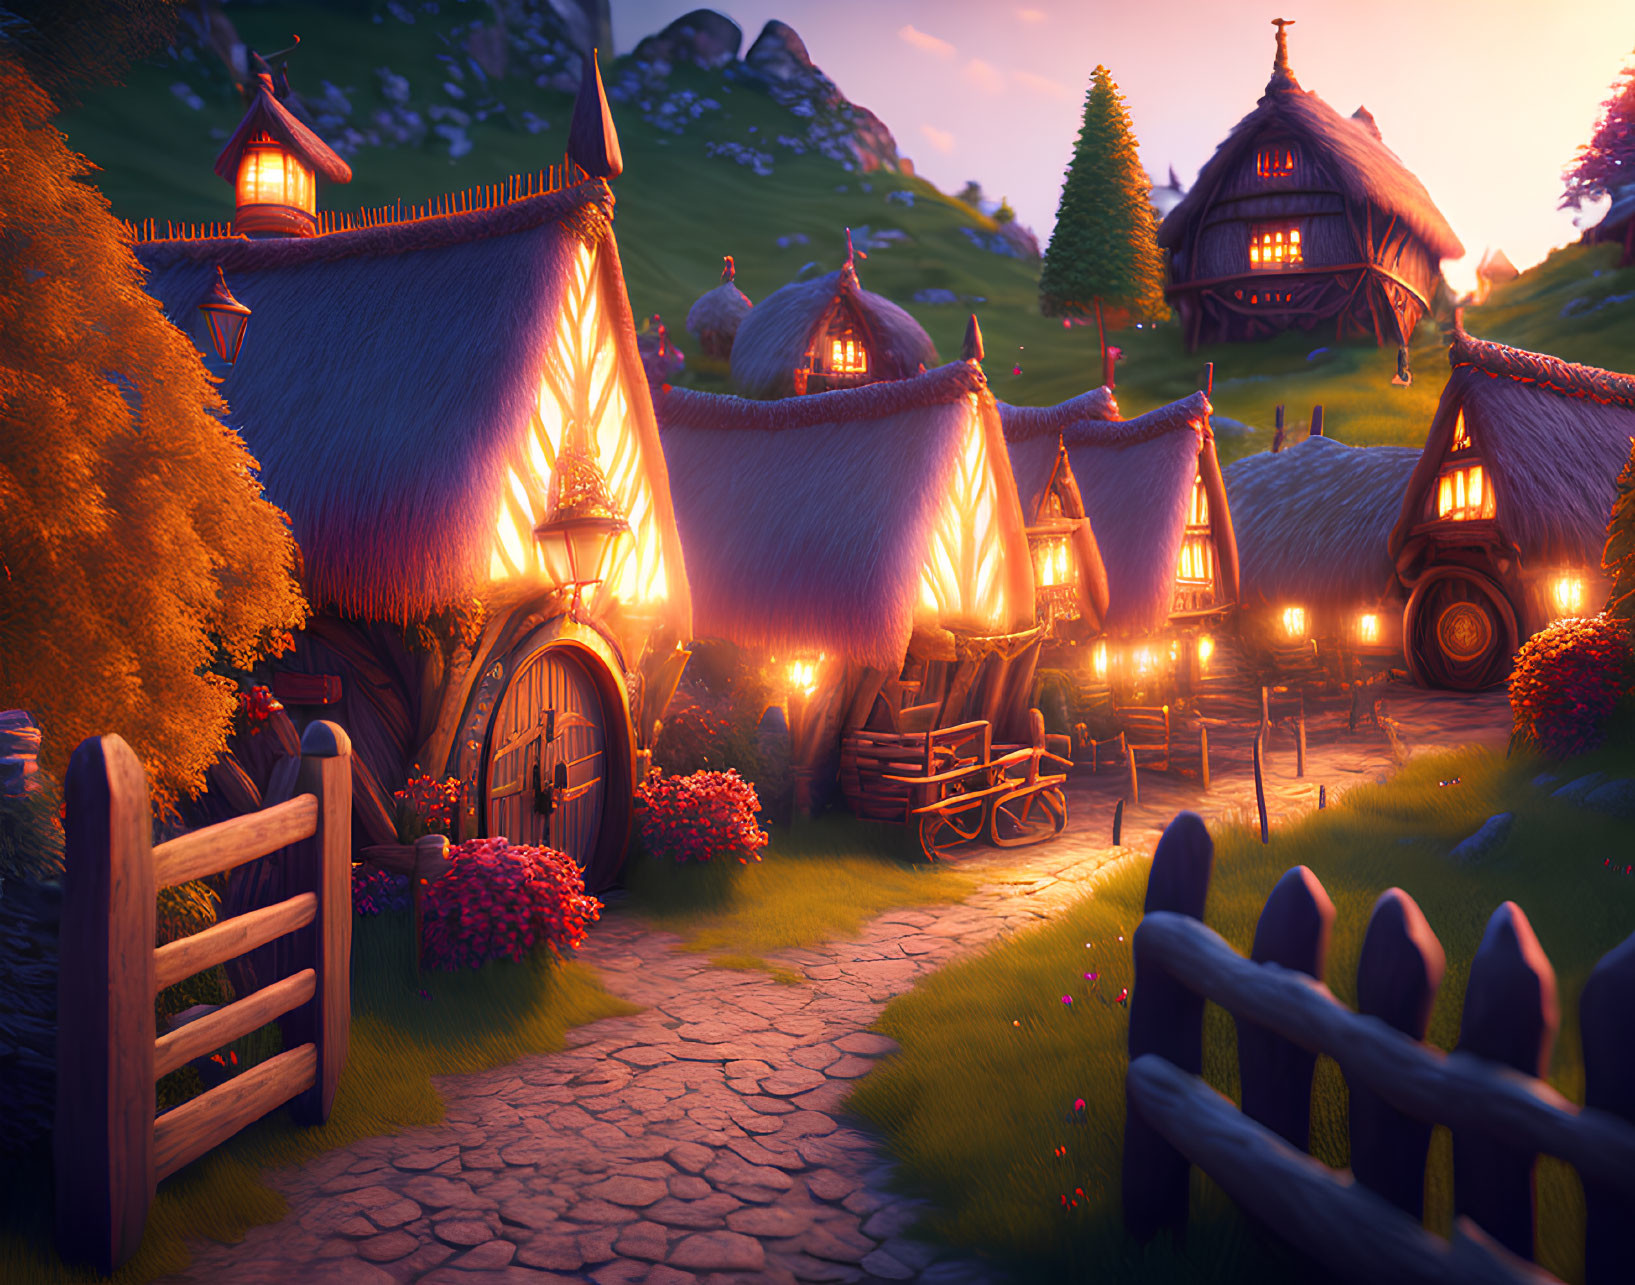 Charming Twilight Scene of Thatched-Roof Village